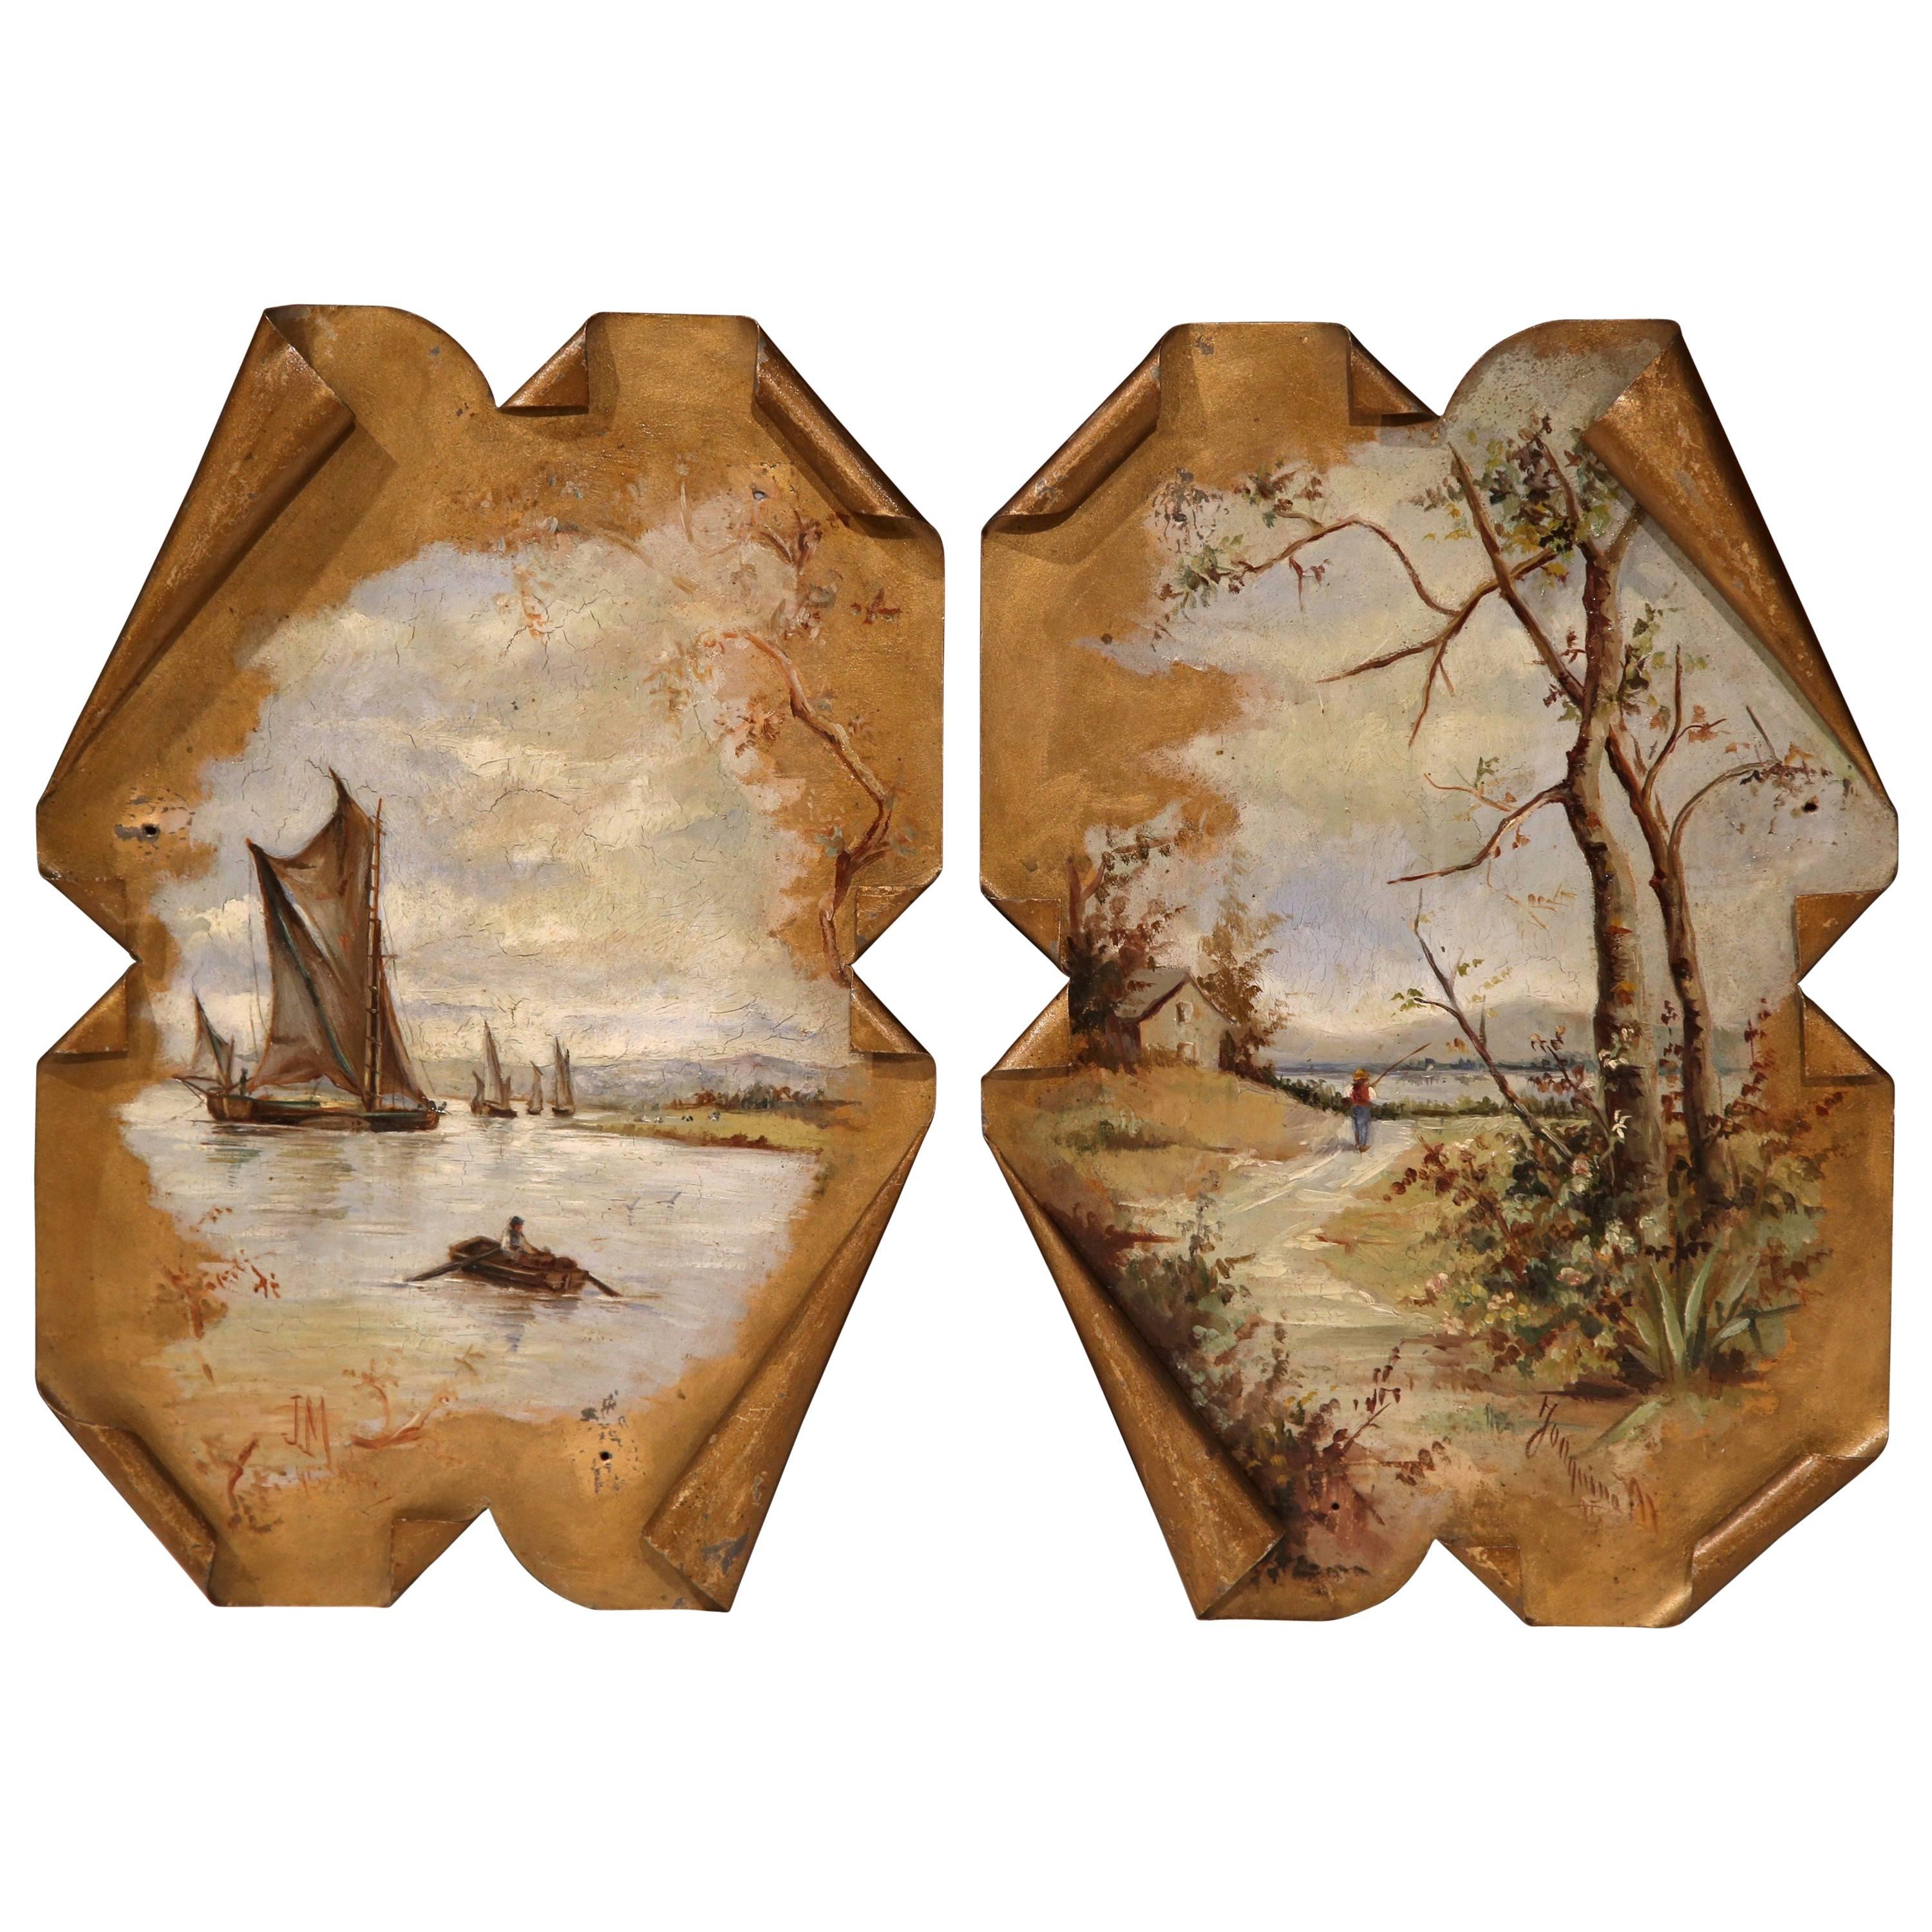 Pair of 19th Century French Hand-Painted Tole Wall Panels Signed Jonquina